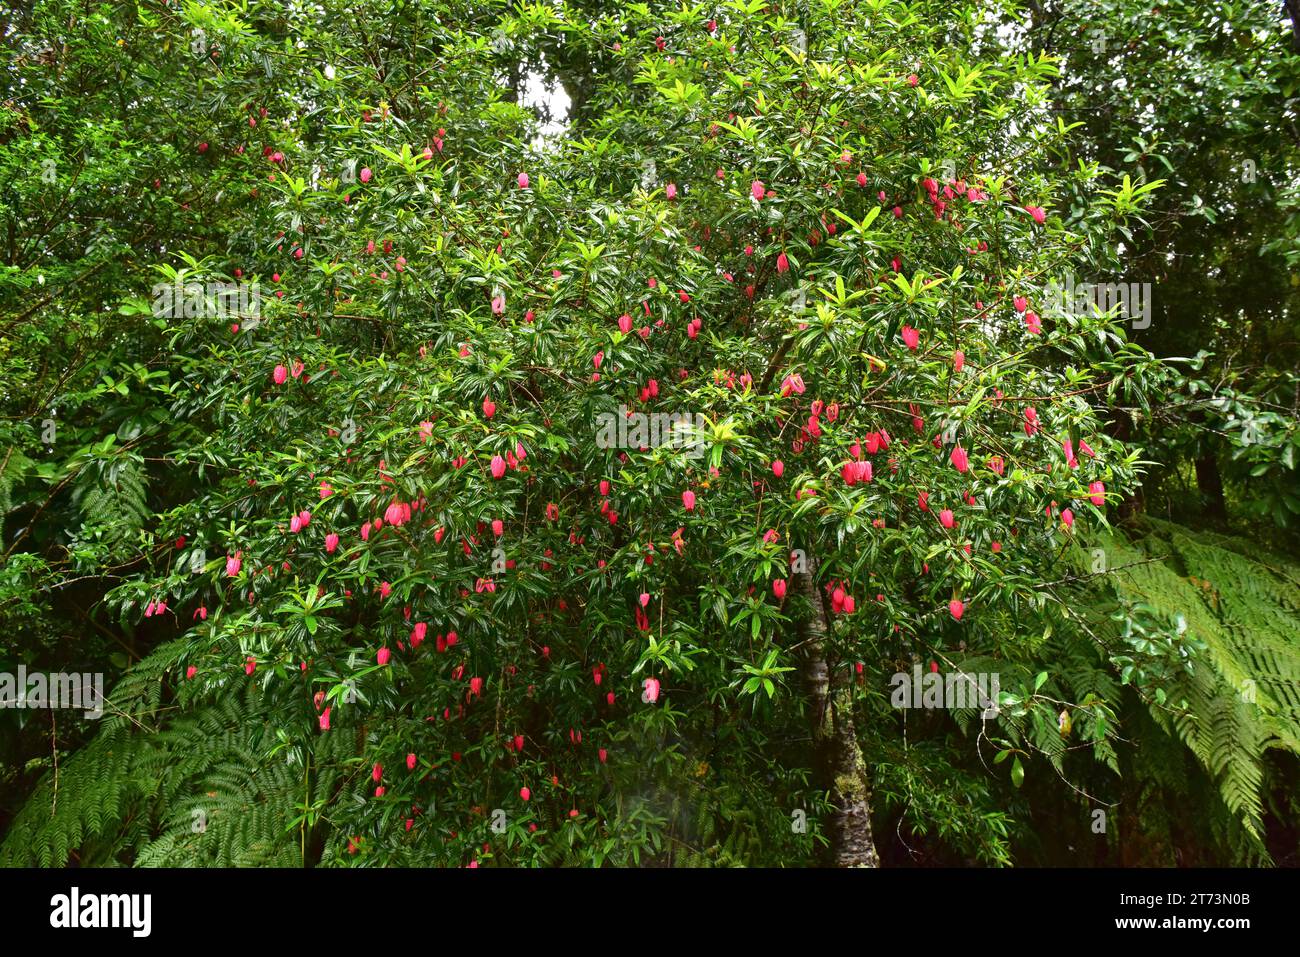 Chilean lantern tree or chaquihue (Crinodendron hookerianum) is an evergreen tree endemic to Chile. This photo was taken in Alerce Andino National Par Stock Photo